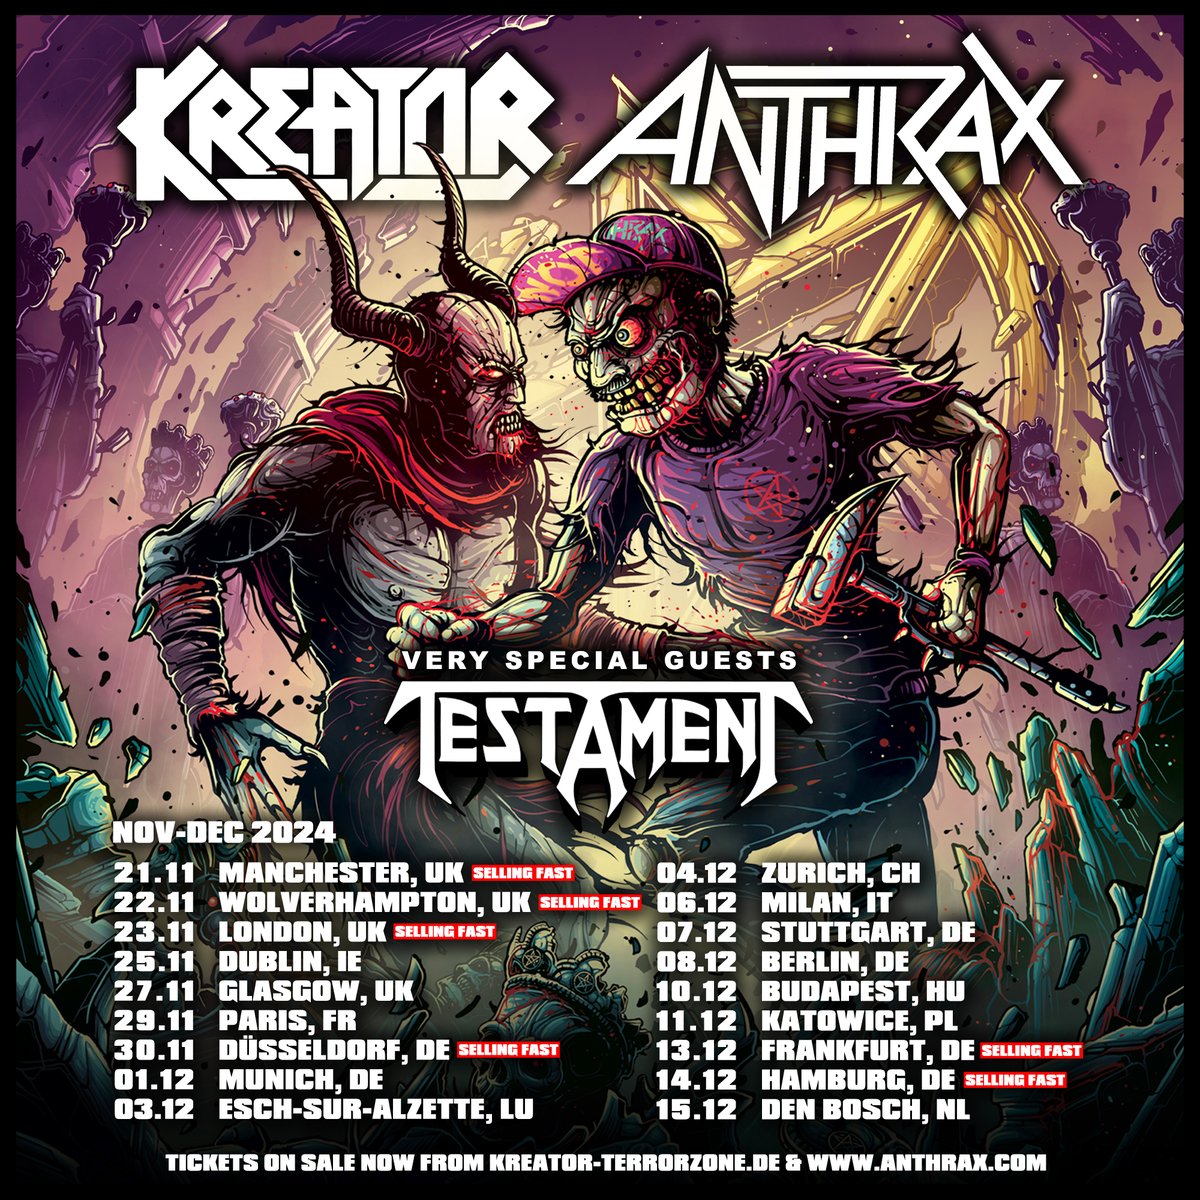 Hordes! Kreator tour the UK and Europe with Anthrax and special guests Testament, this November ⚔️ We’re planning to bring our most monstrous production to date for some of our biggest ever shows in Europe🔥 Get tickets and VIP now from kreator-terrorzone.de